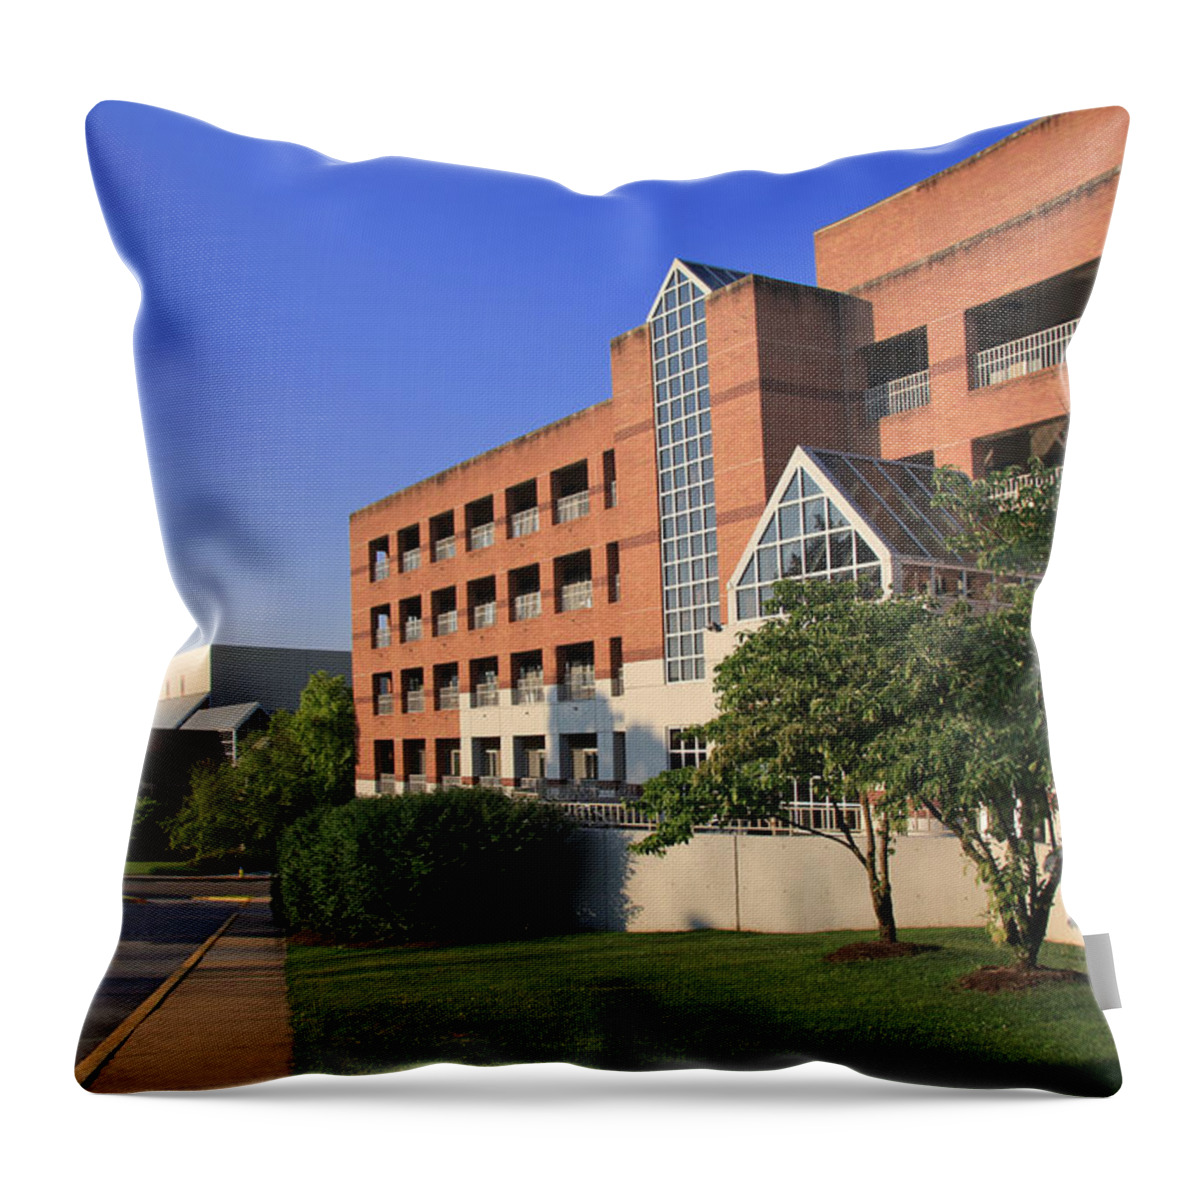 University Of Tennessee Throw Pillow featuring the photograph University of Tennessee Campus by Melinda Fawver